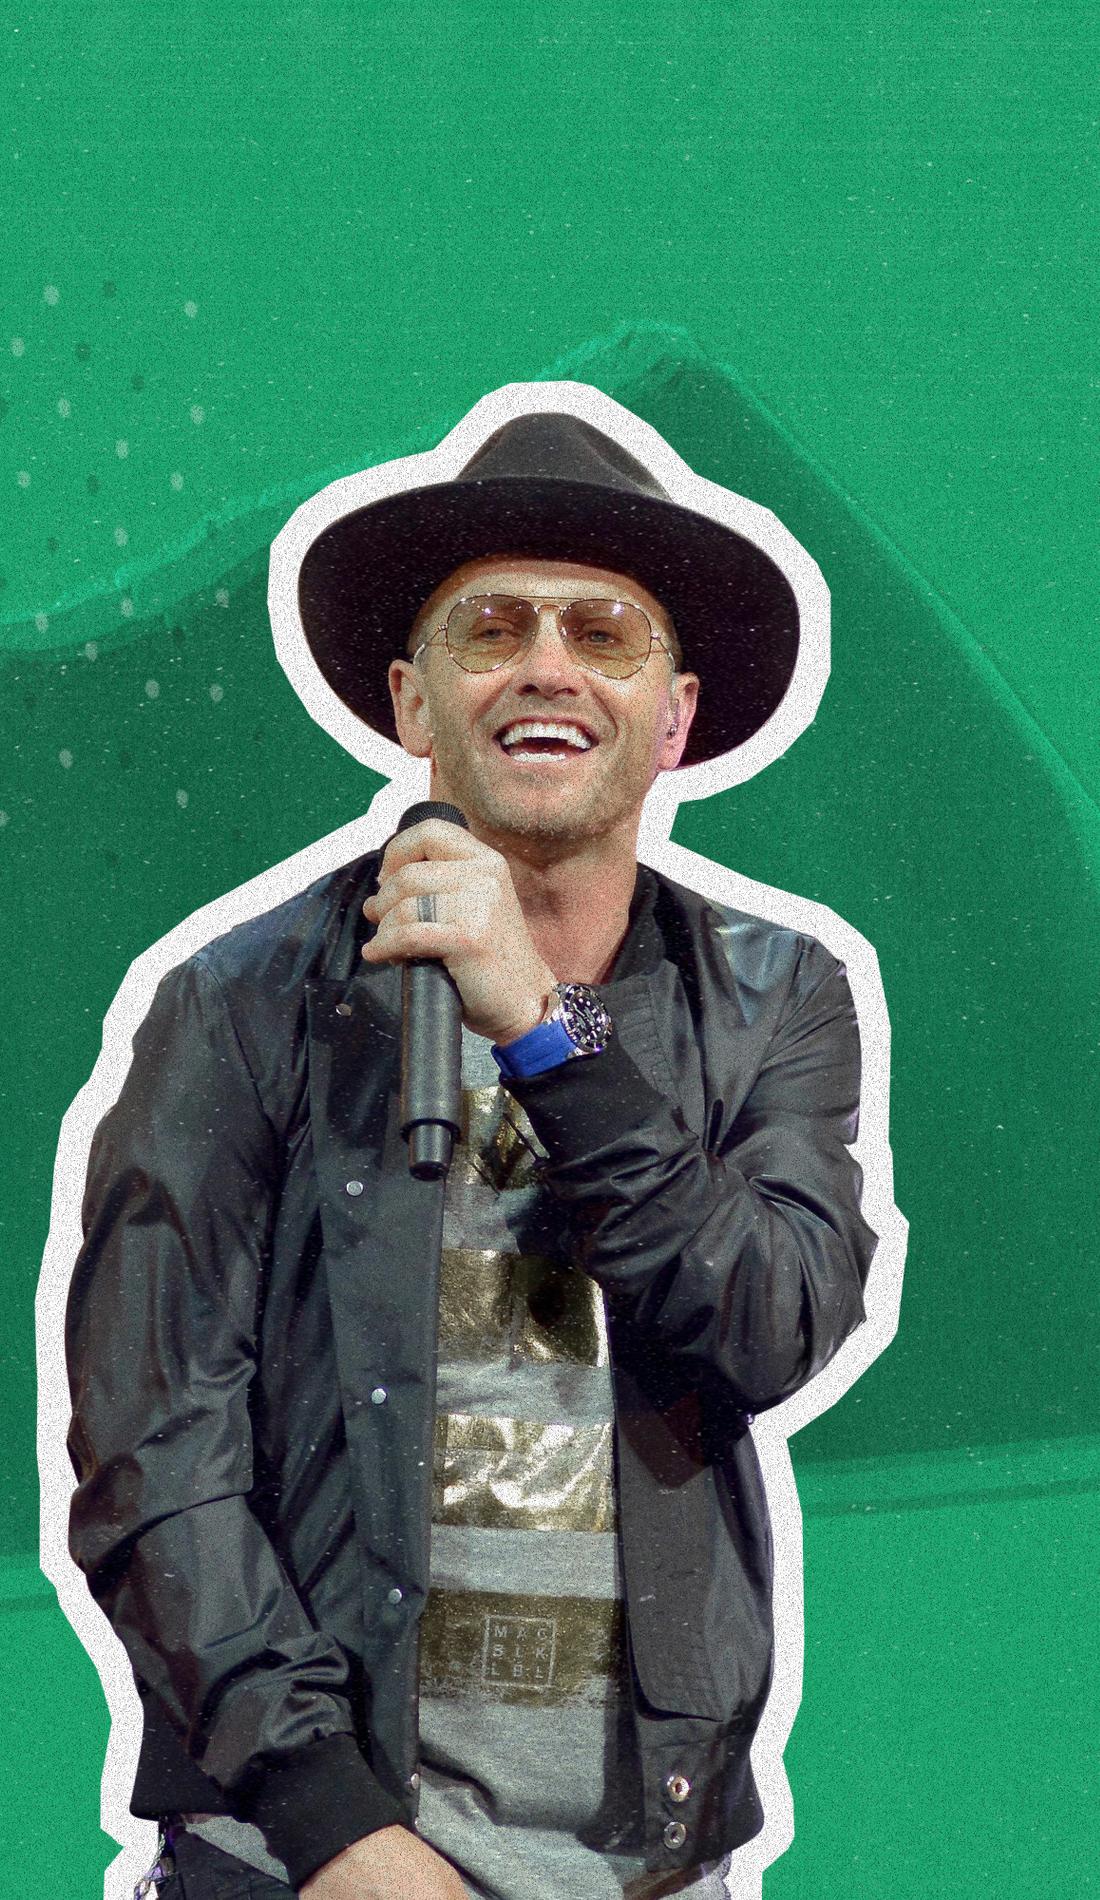 TobyMac in Concert, Green Country Oklahoma